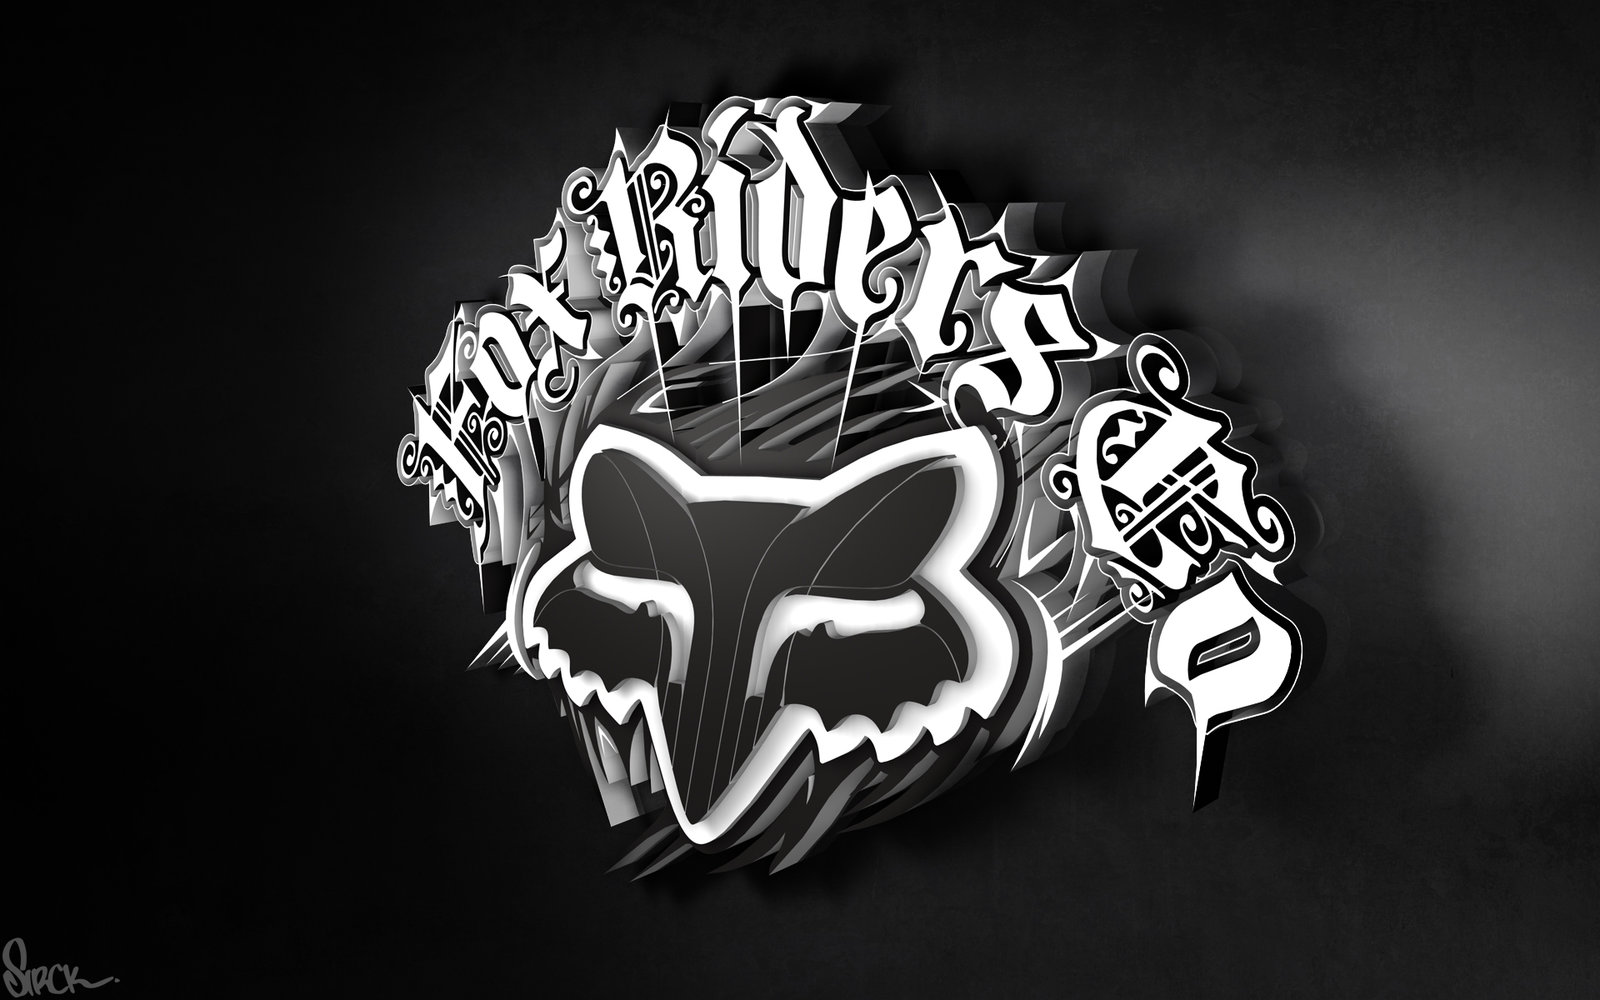 Fox Riders 3D Logo Wallpaper by small sk8er on